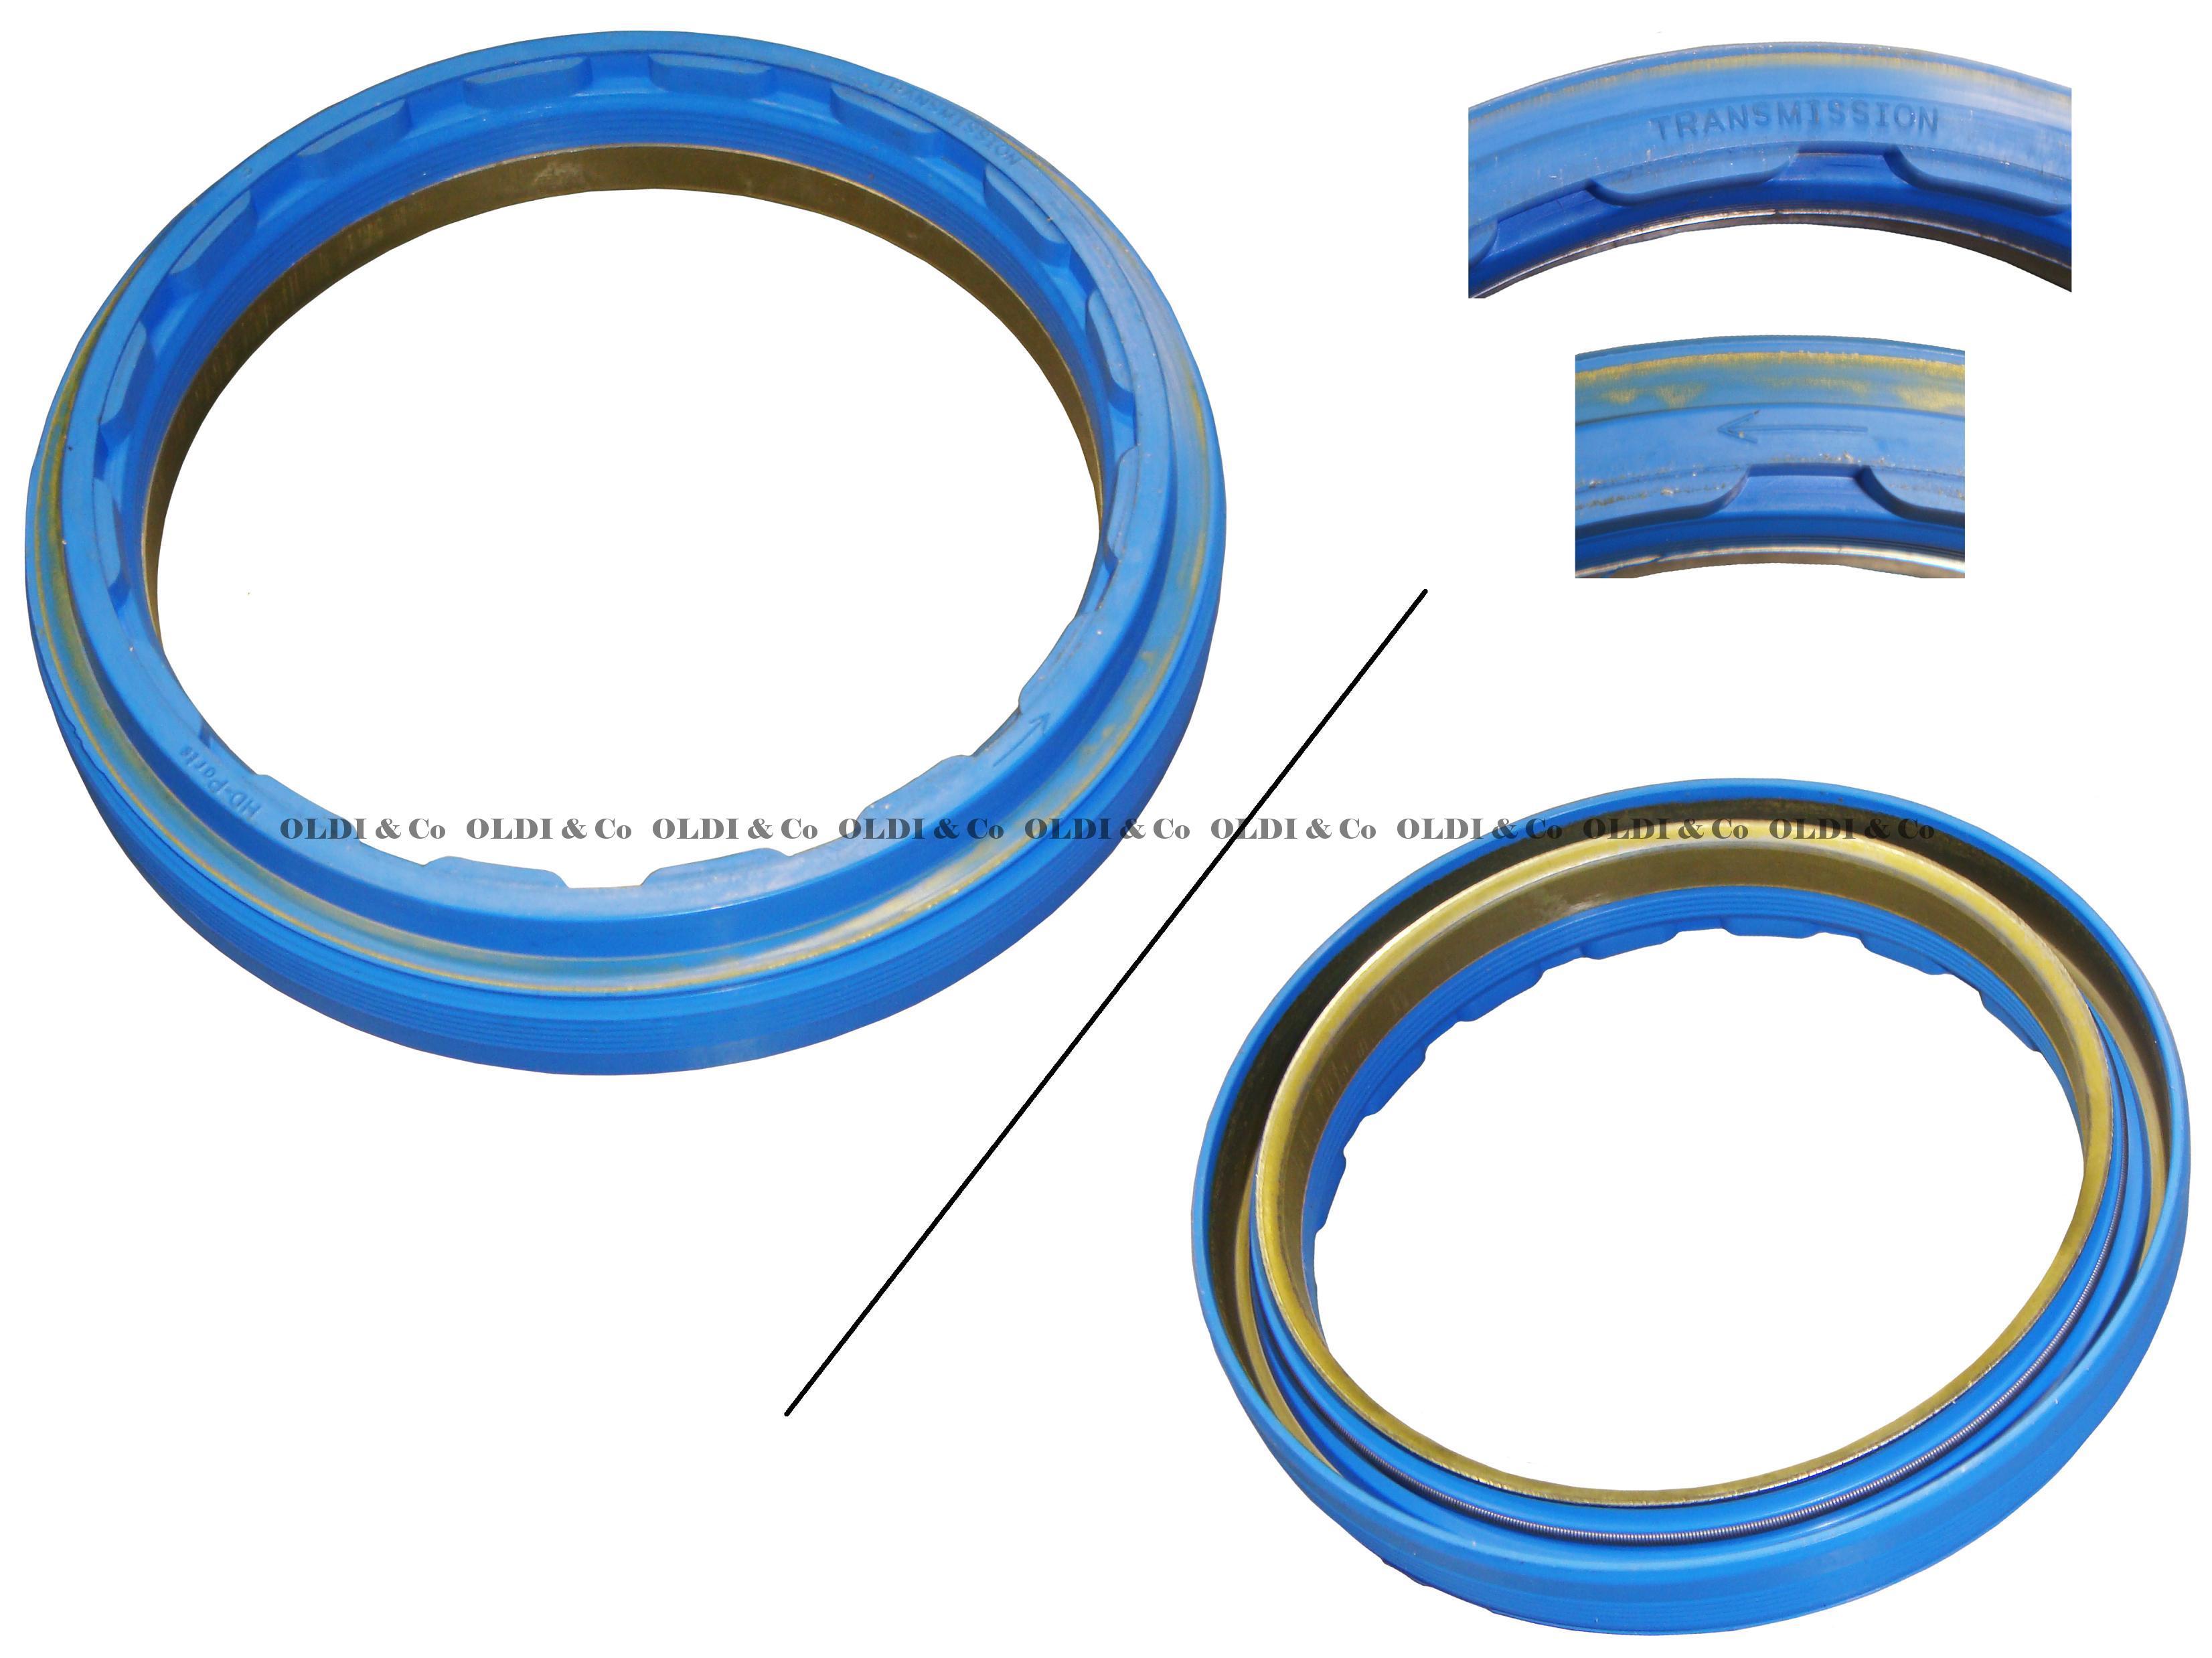 32.034.04859 Transmission parts → Gearbox raer oil seal